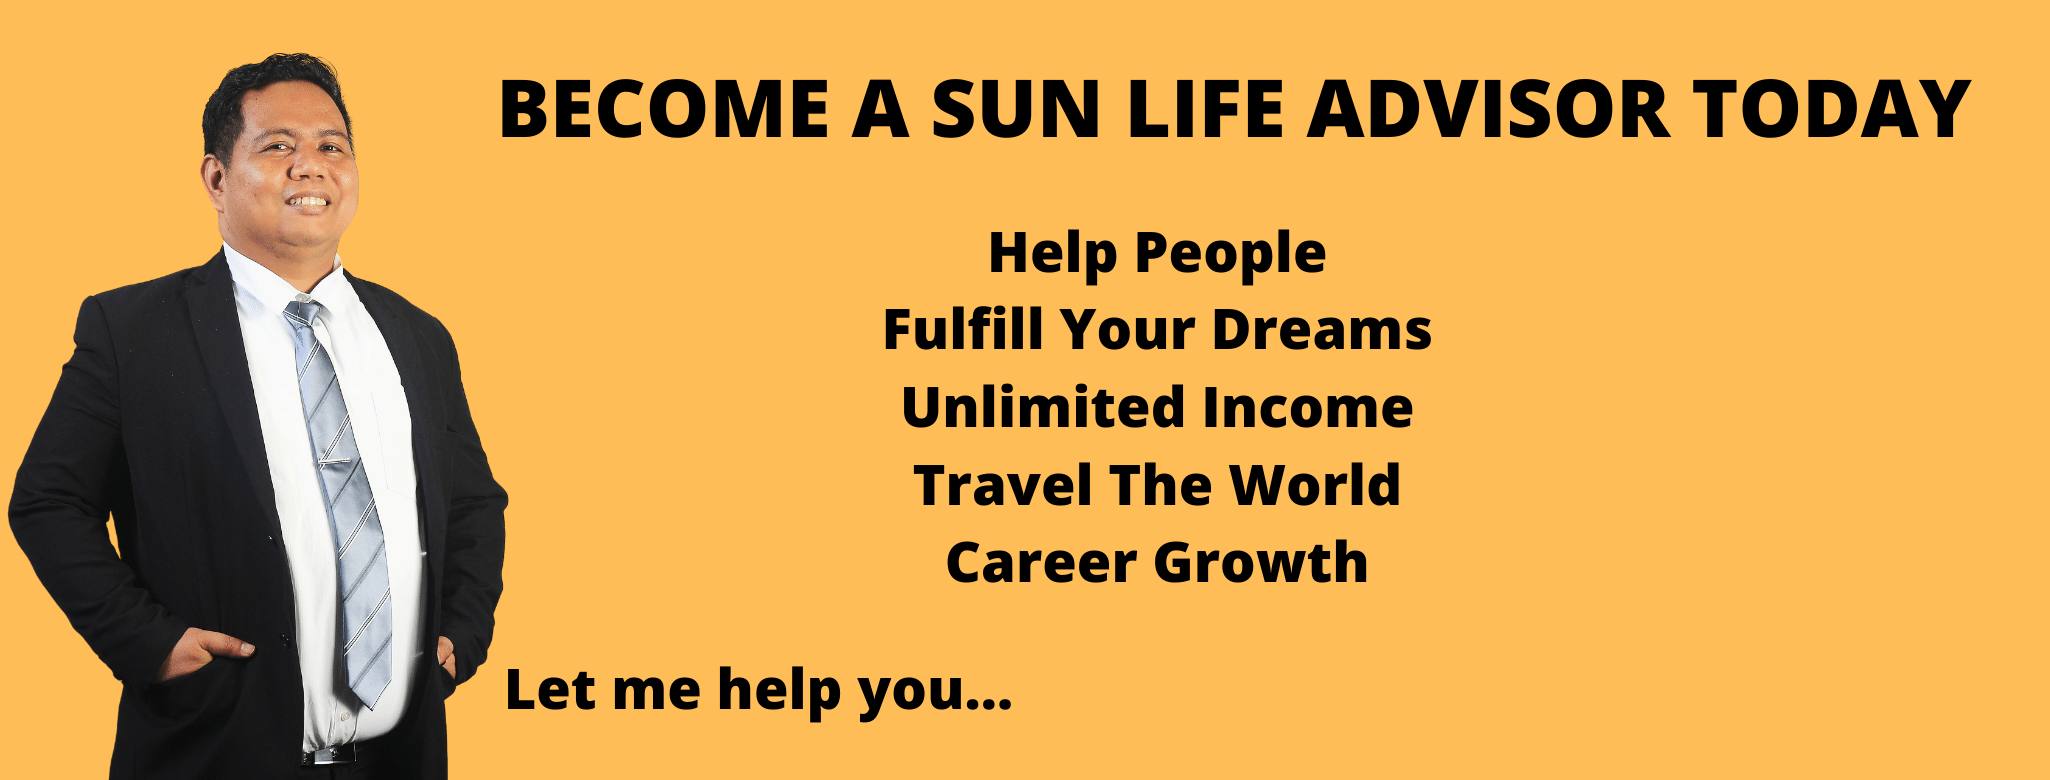 How To Become A Sun Life Financial Advisor in the Philippines